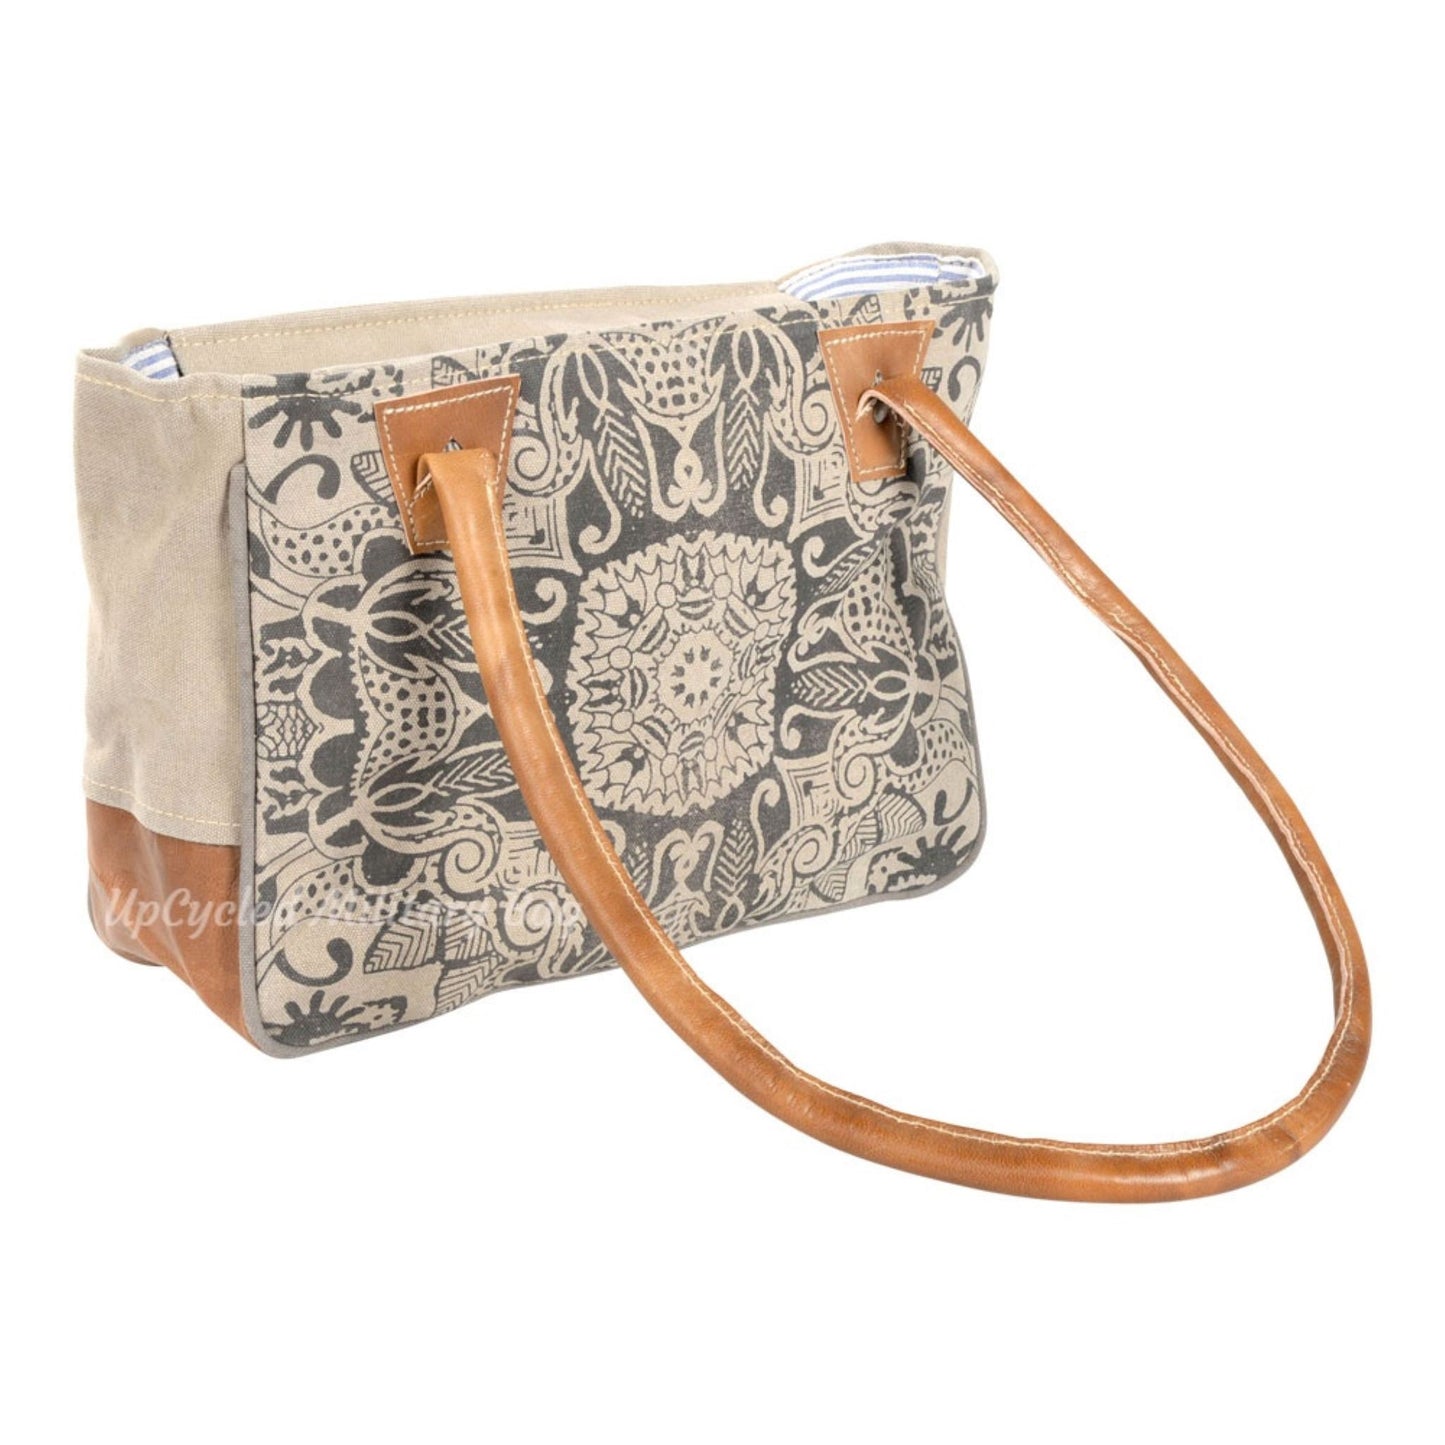 Vintage Flower Canvas Shoulder Bag with Retro Vibe and Serious Flower Power!